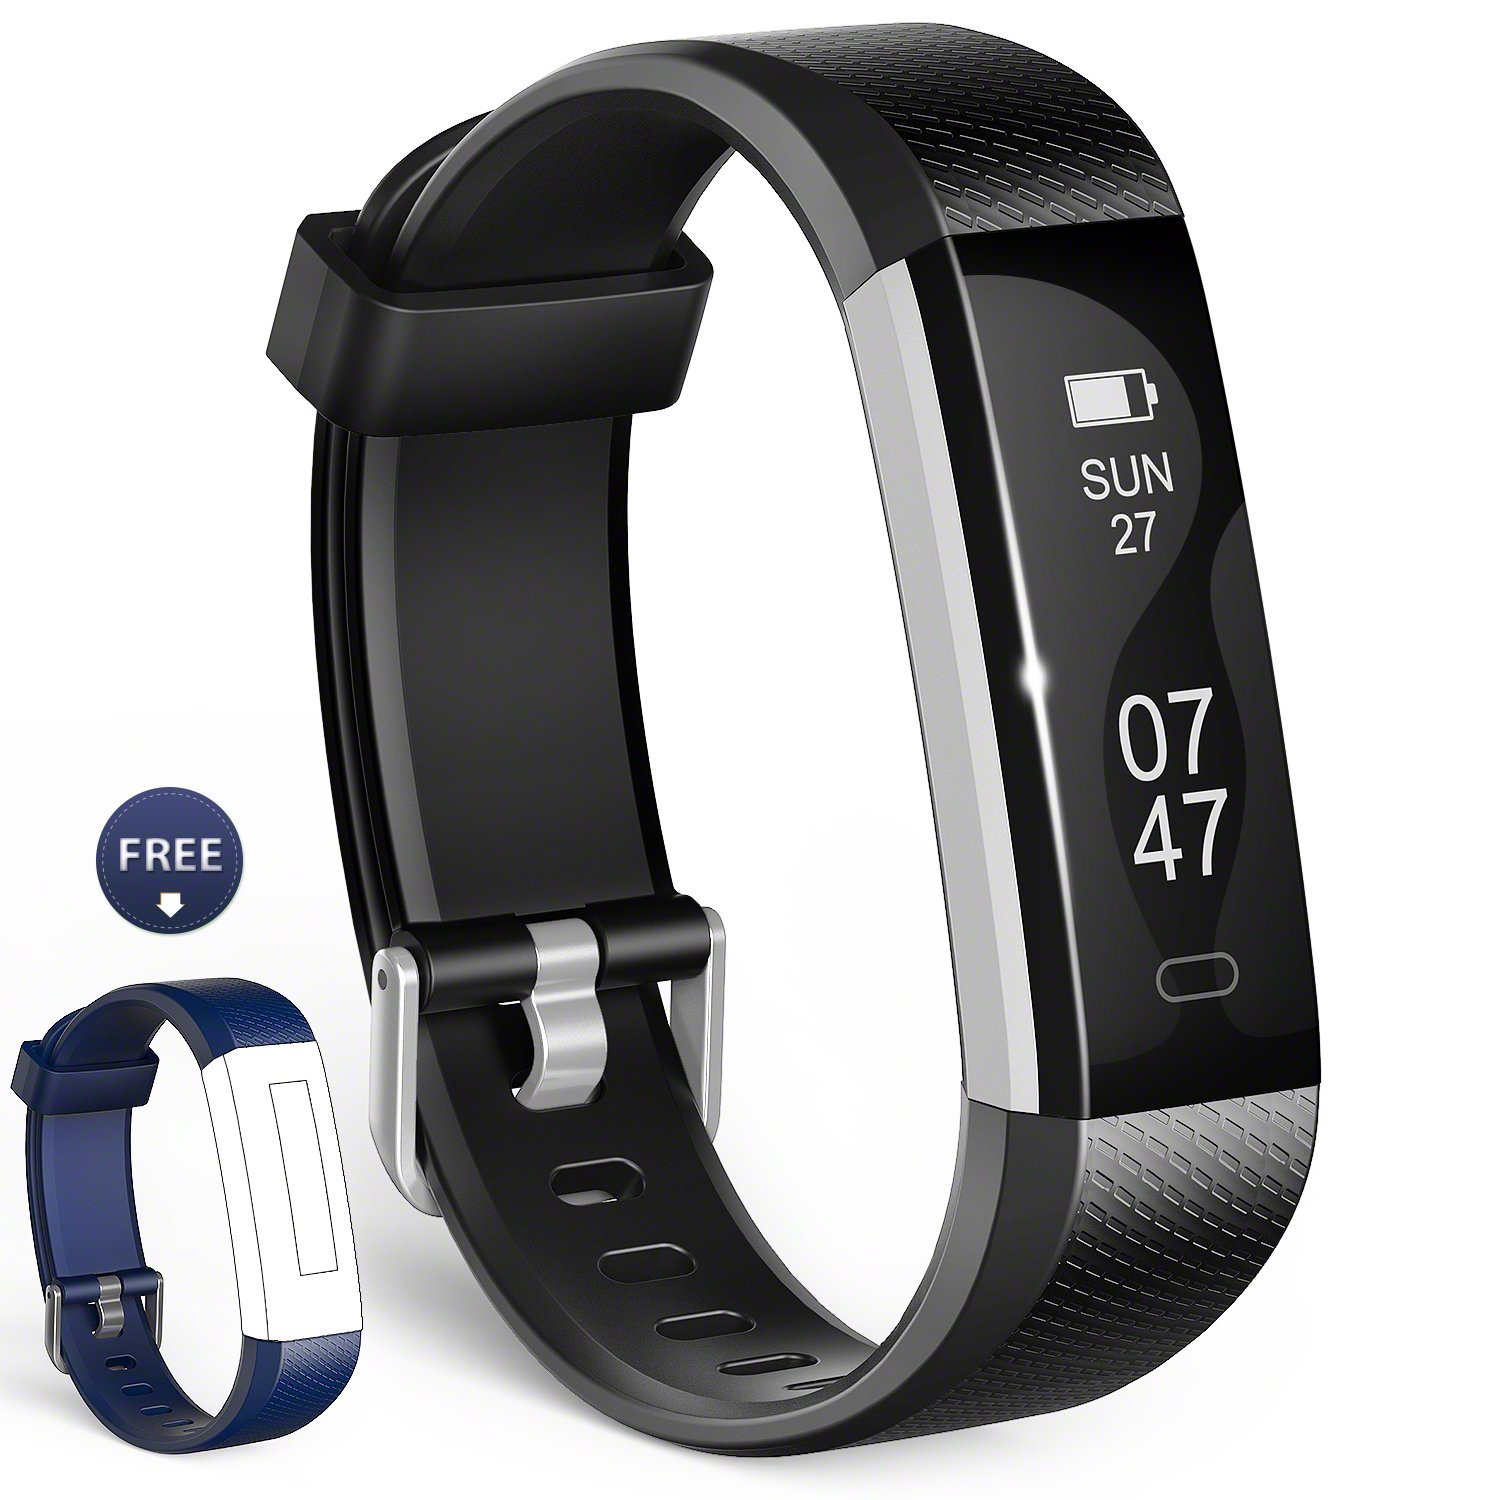 Wesoo K1 Fitness Wristband Activity Tracker Smart Band with Sleep Monitor Only $17.99!